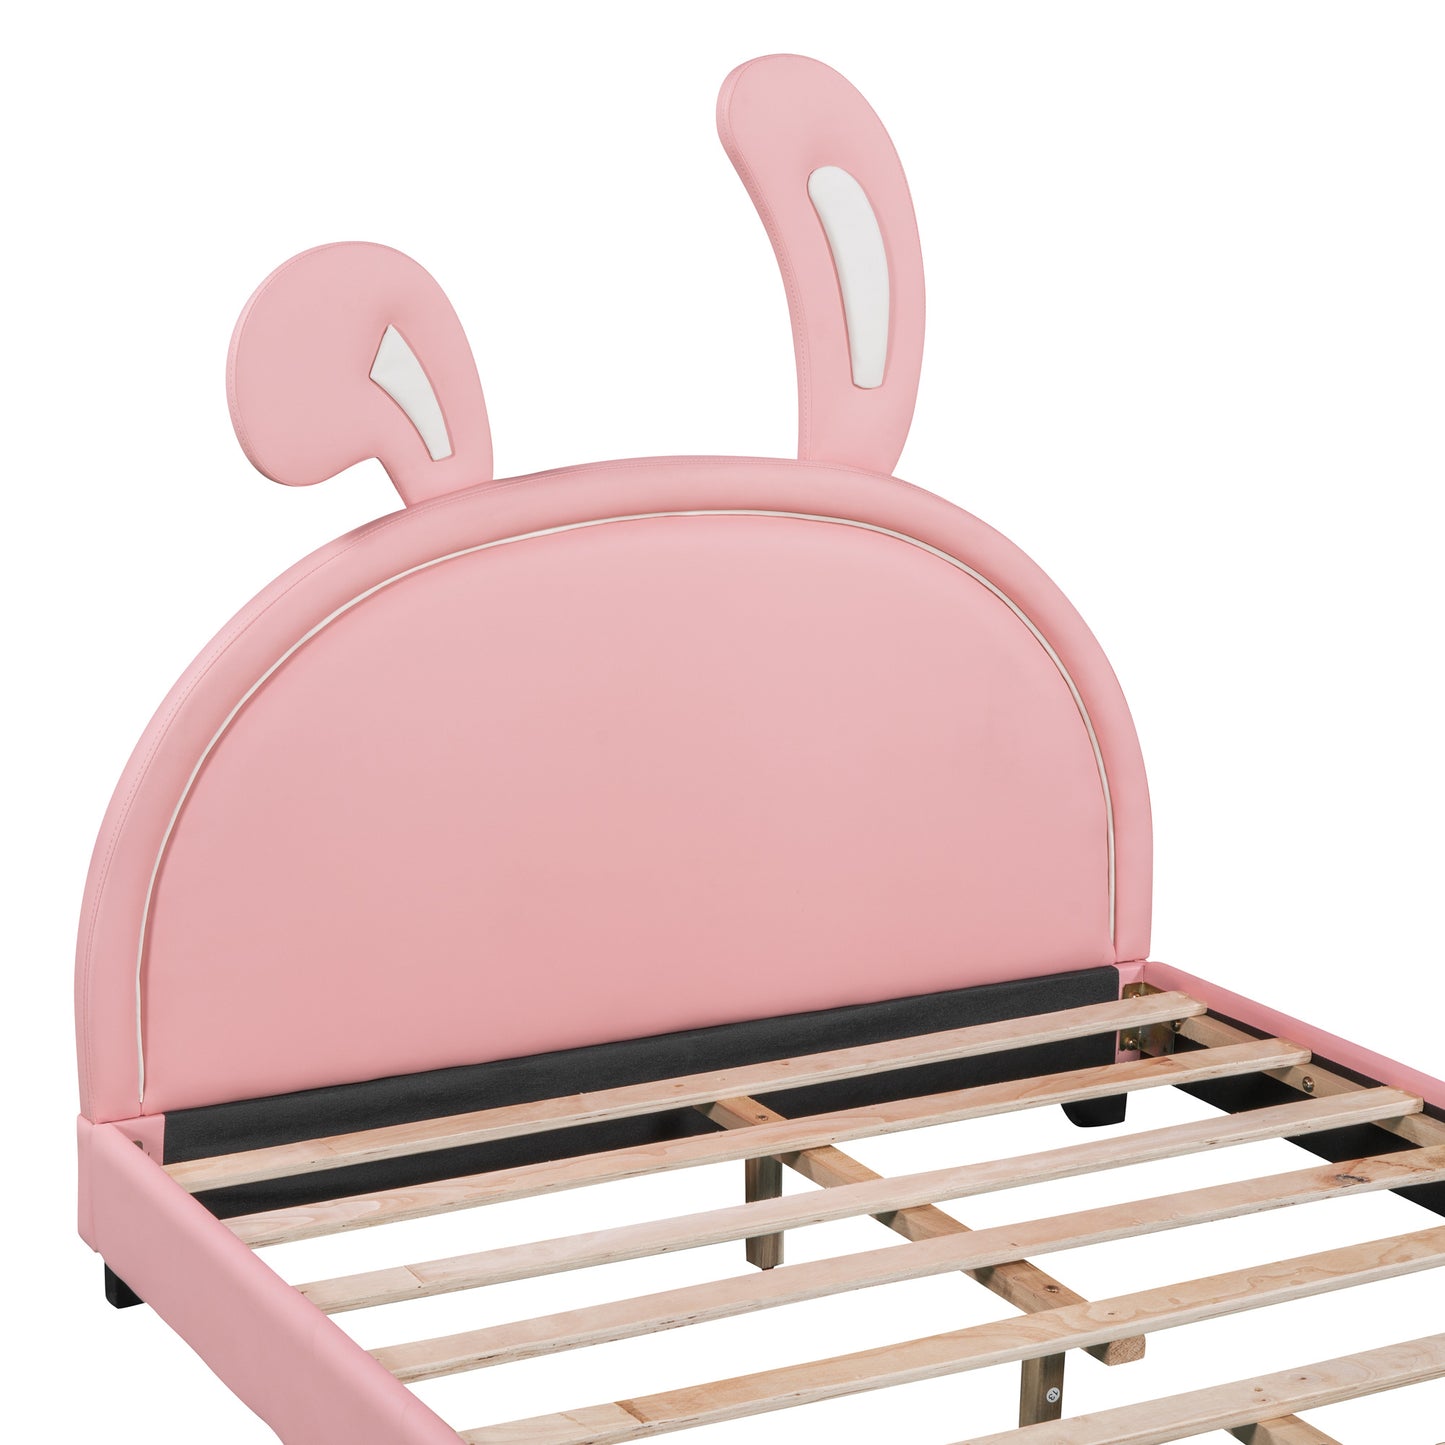 upholstered leather platform bed with rabbit ornament, pink